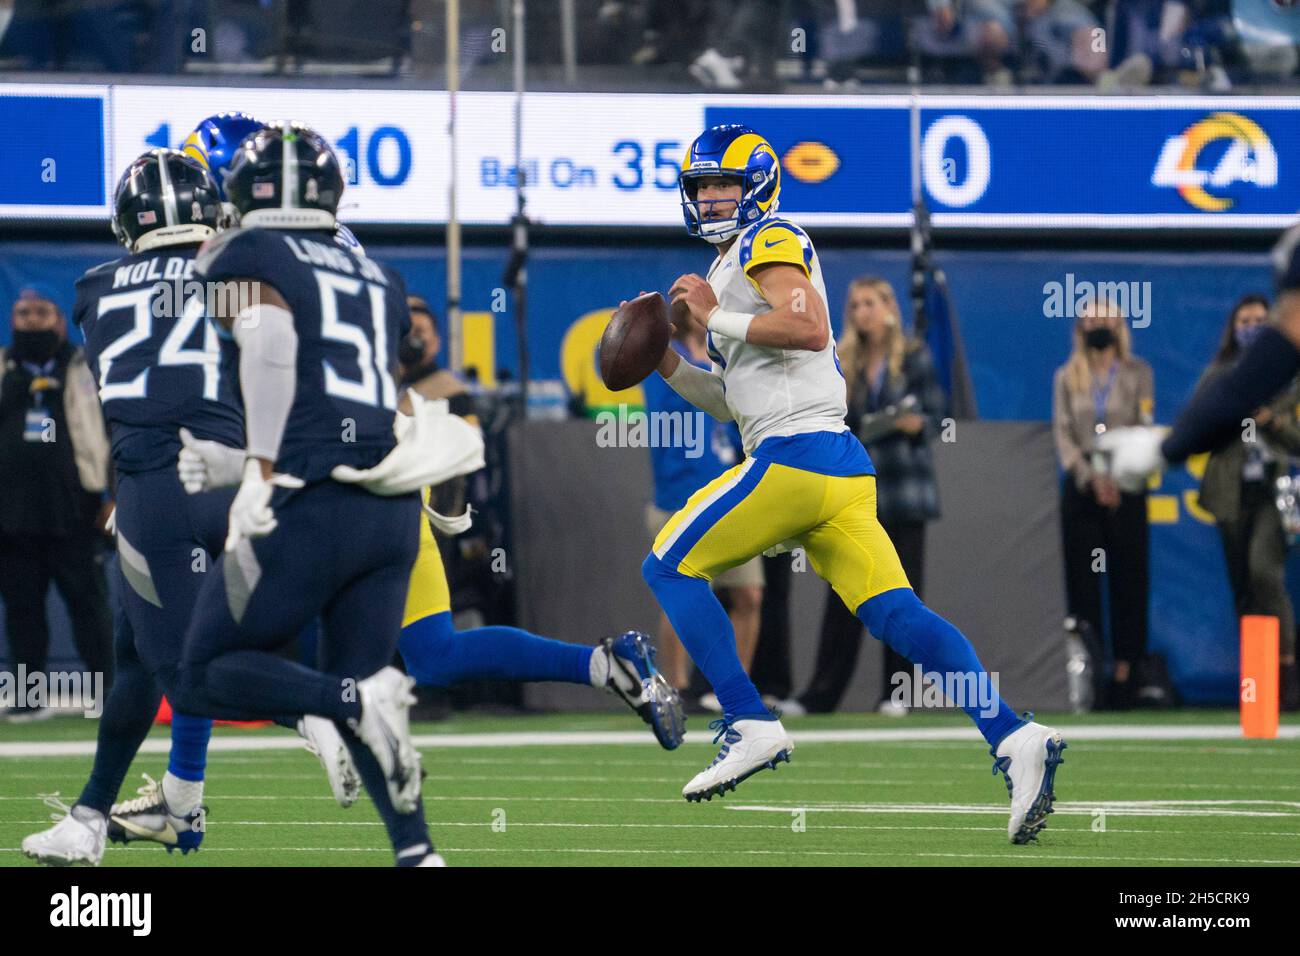 Los Angeles Rams quarterback Matthew Stafford (9) scrambles during a NFL game against the Tennessee Titans, Sunday, Nov. 7, 2021, in Inglewood, the Ti Stock Photo